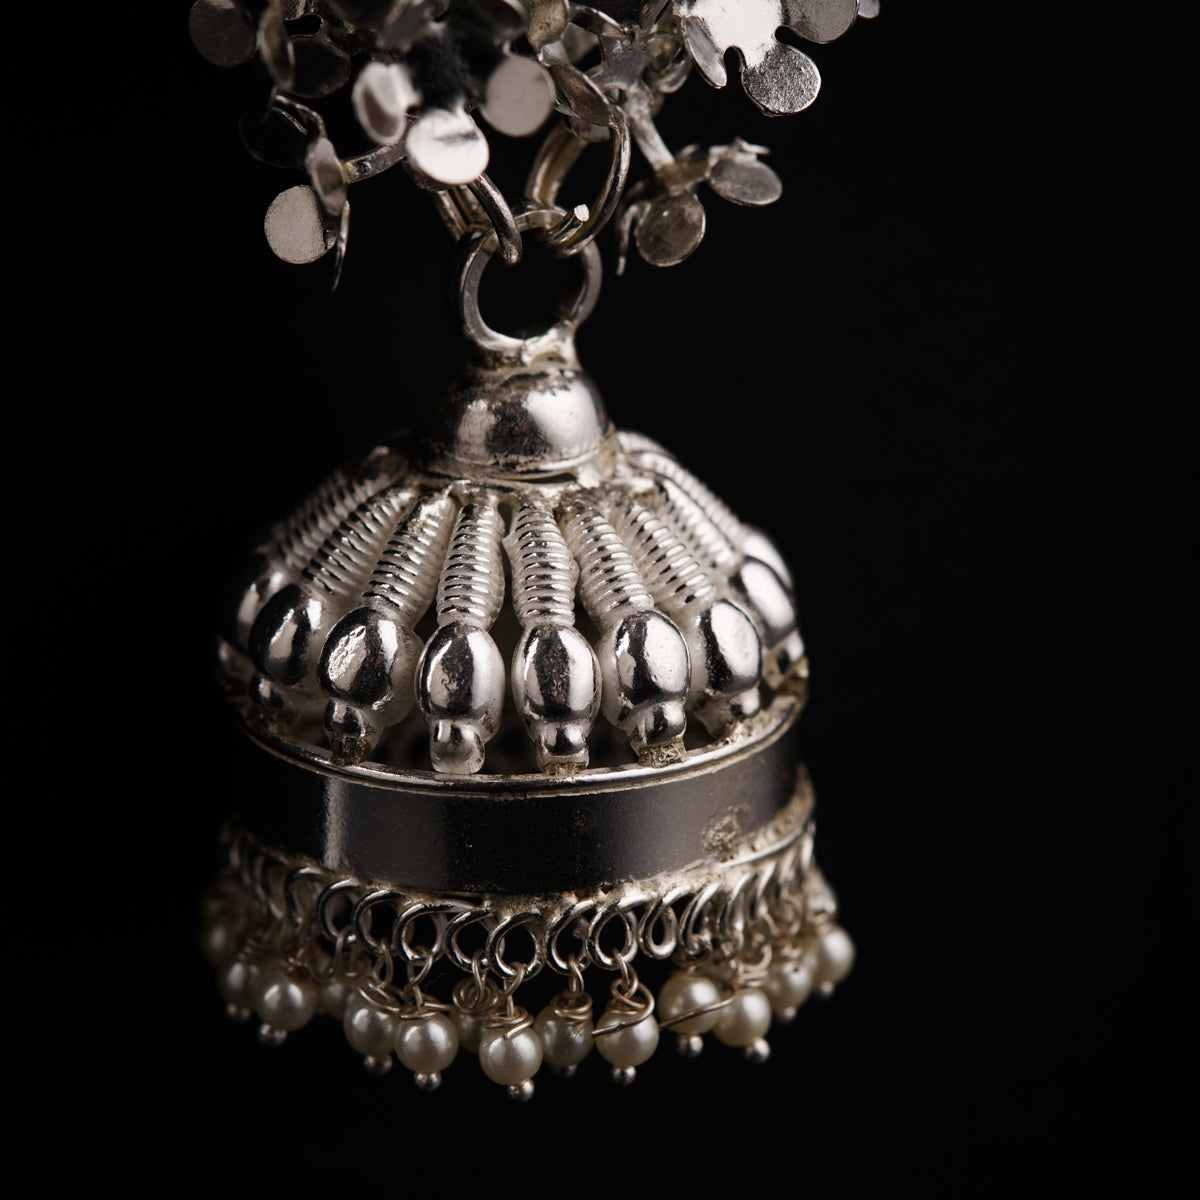 a silver vase filled with lots of silver beads